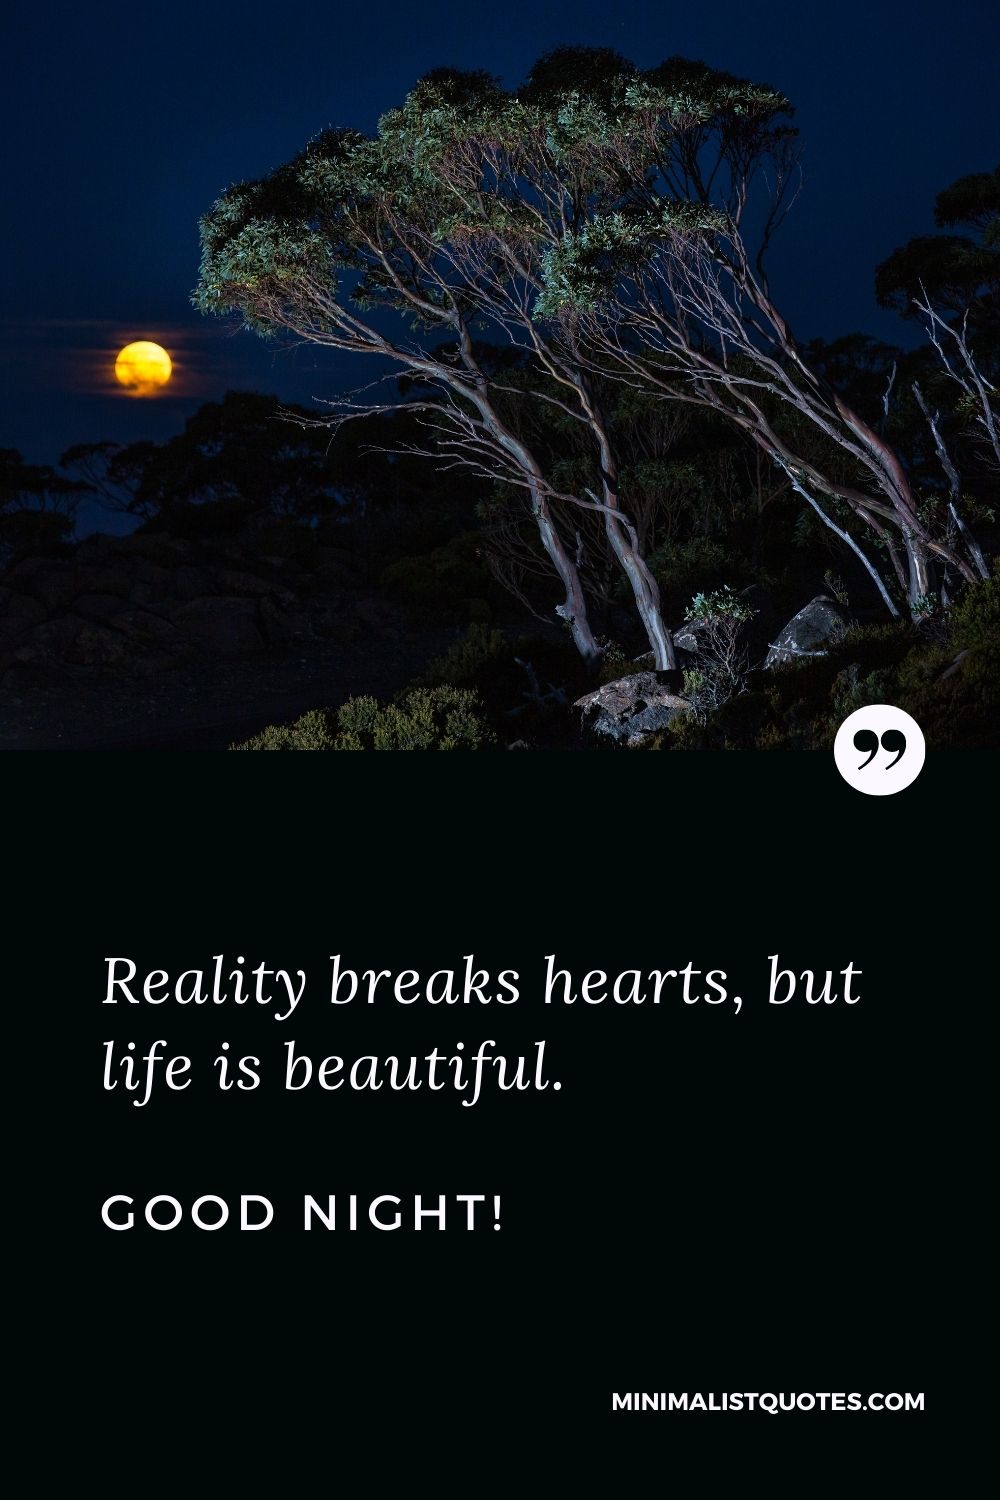 Reality breaks hearts, but life is beautiful. Good night!